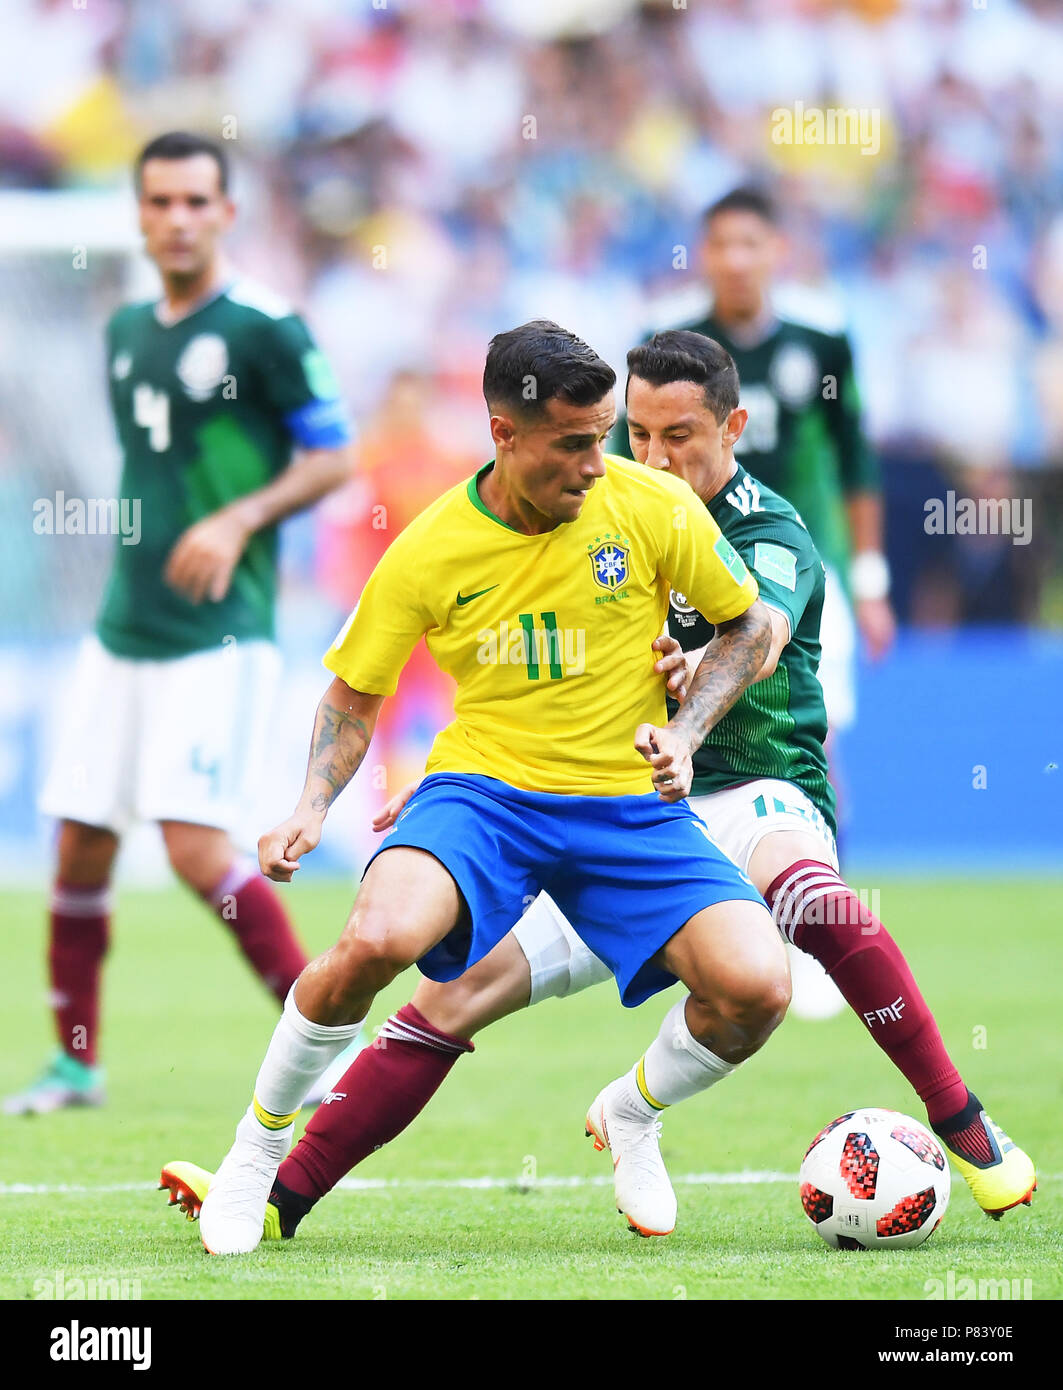 SAMARA, RUSSIA - JULY 02: Philippe Coutinho of Brazil competes with Andres Guardado of Mexico during the 2018 FIFA World Cup Russia Round of 16 match between Brazil and Mexico at Samara Arena on July 2, 2018 in Samara, Russia. (Photo by Lukasz Laskowski/PressFocus/MB Media) Stock Photo